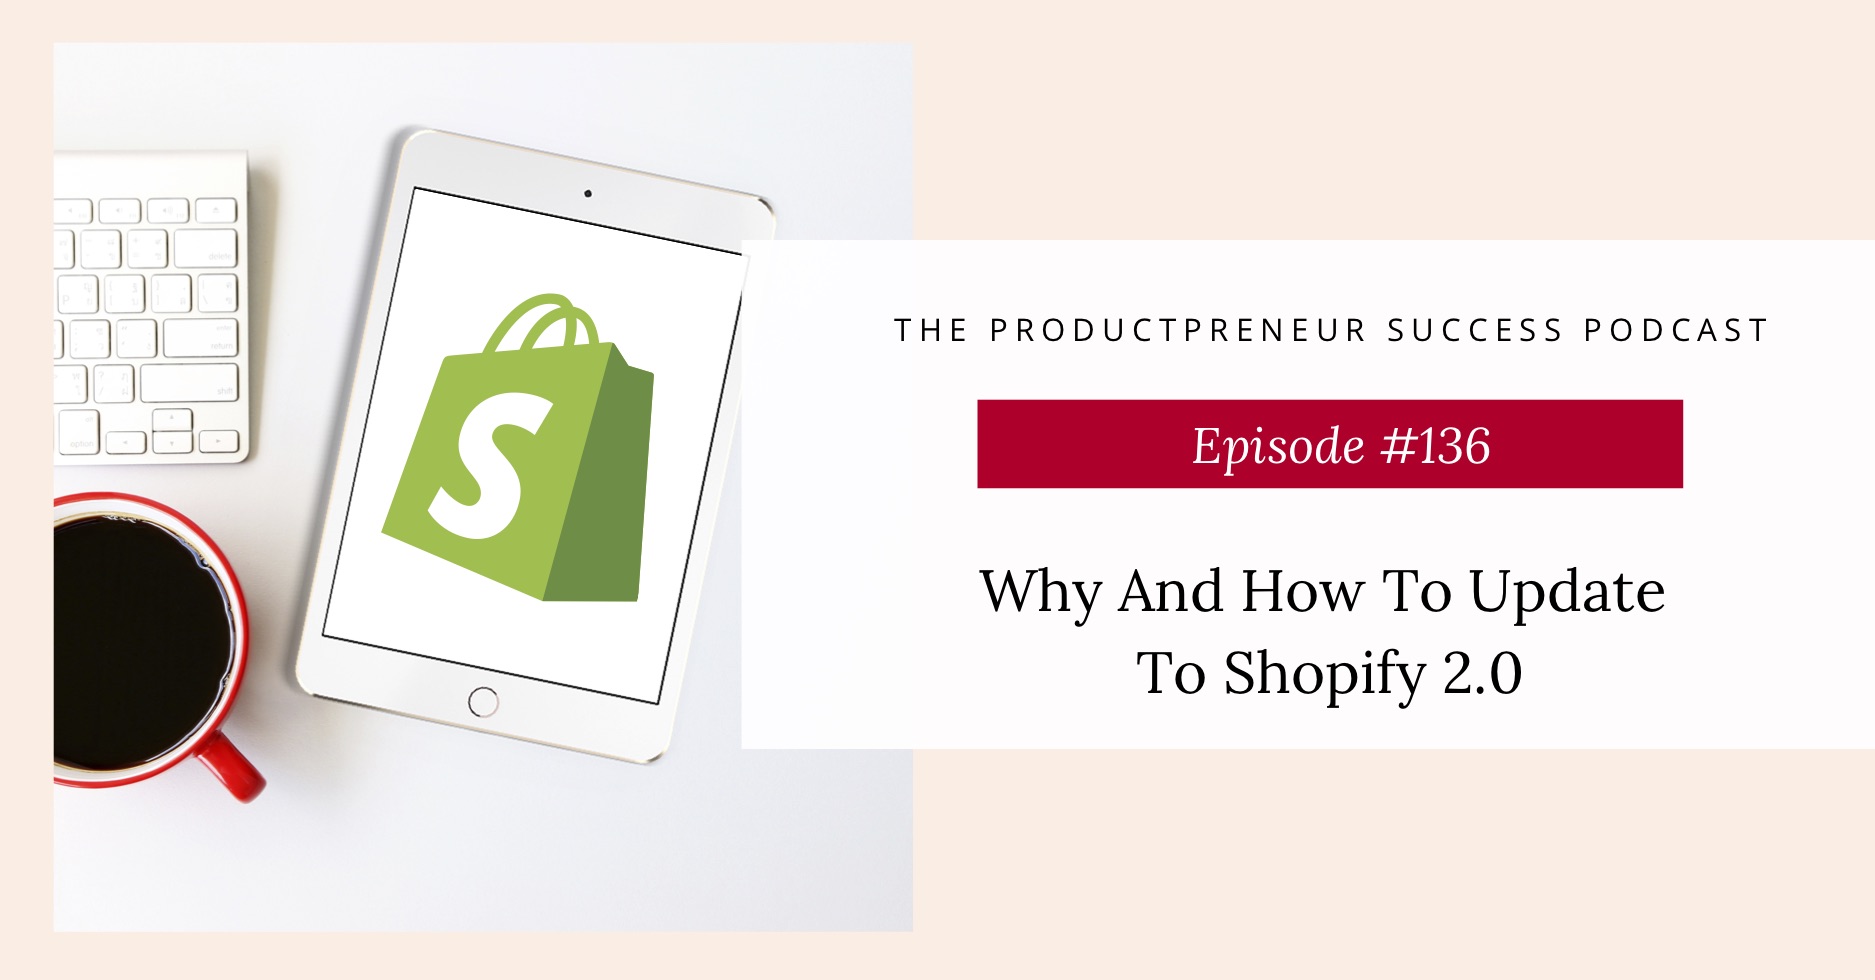 How To Update To Shopify 2.0